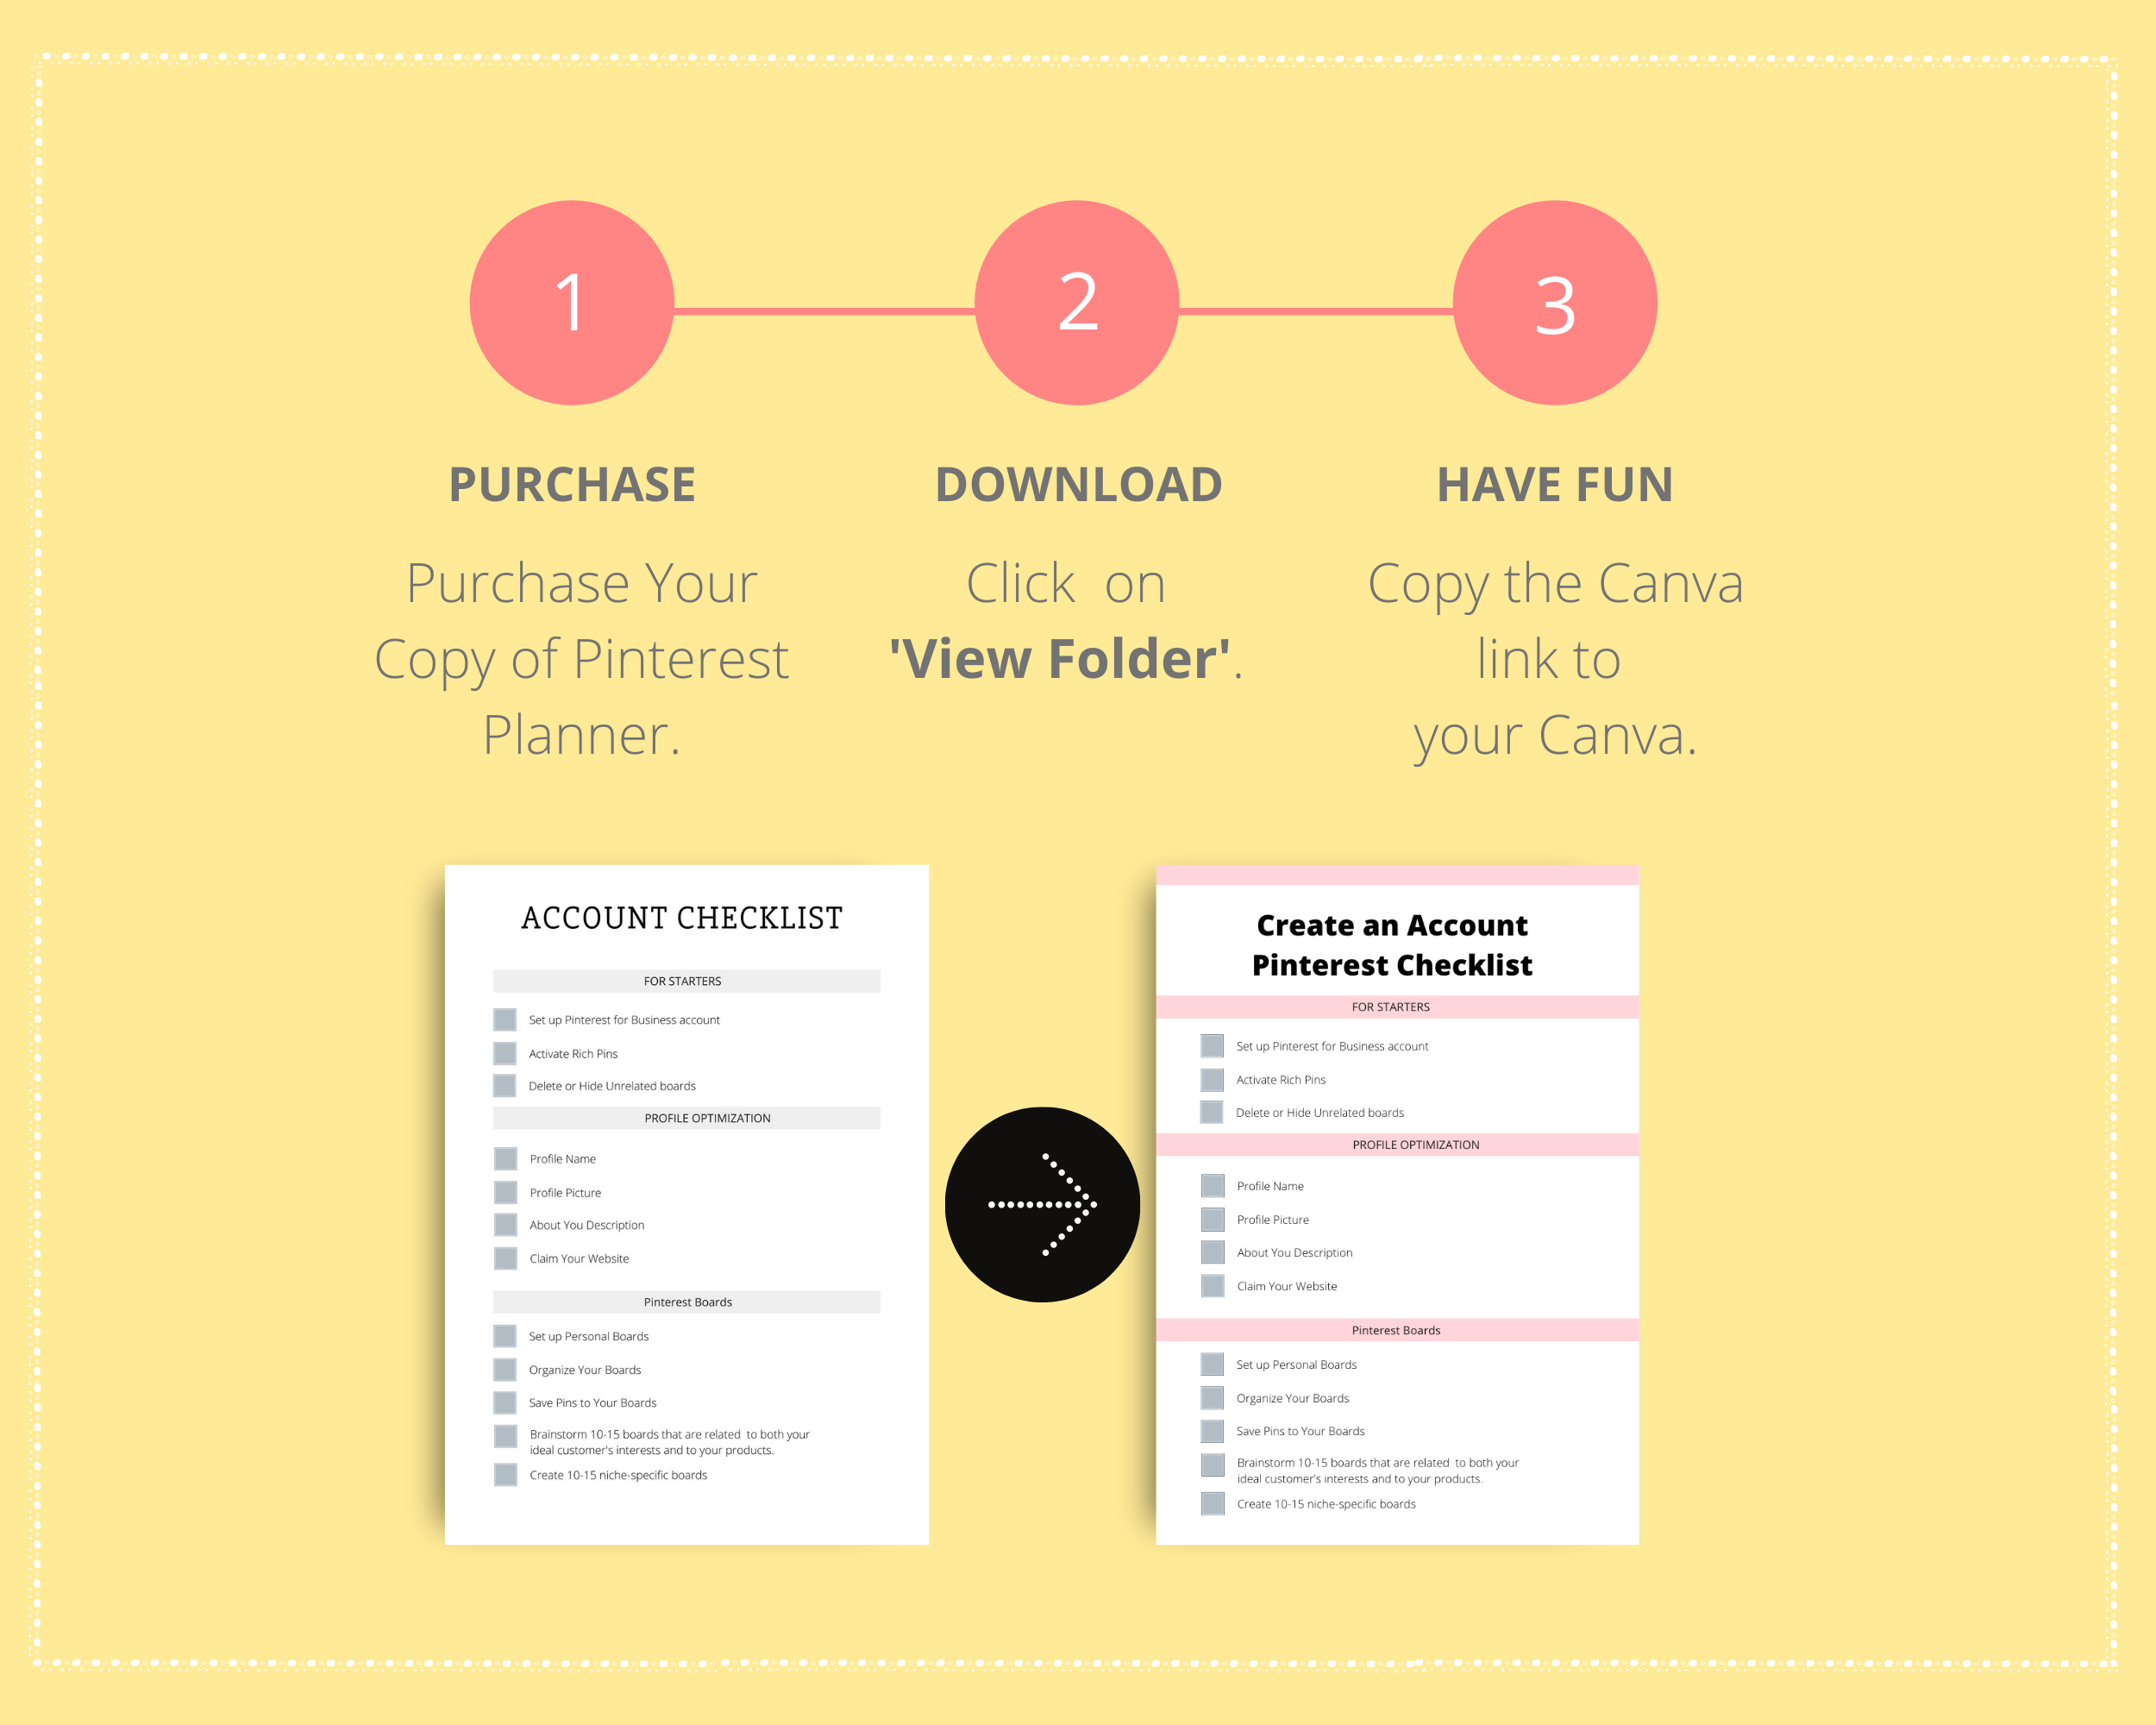 Editable Pinterest Planner Template in Canva | Commercial Use